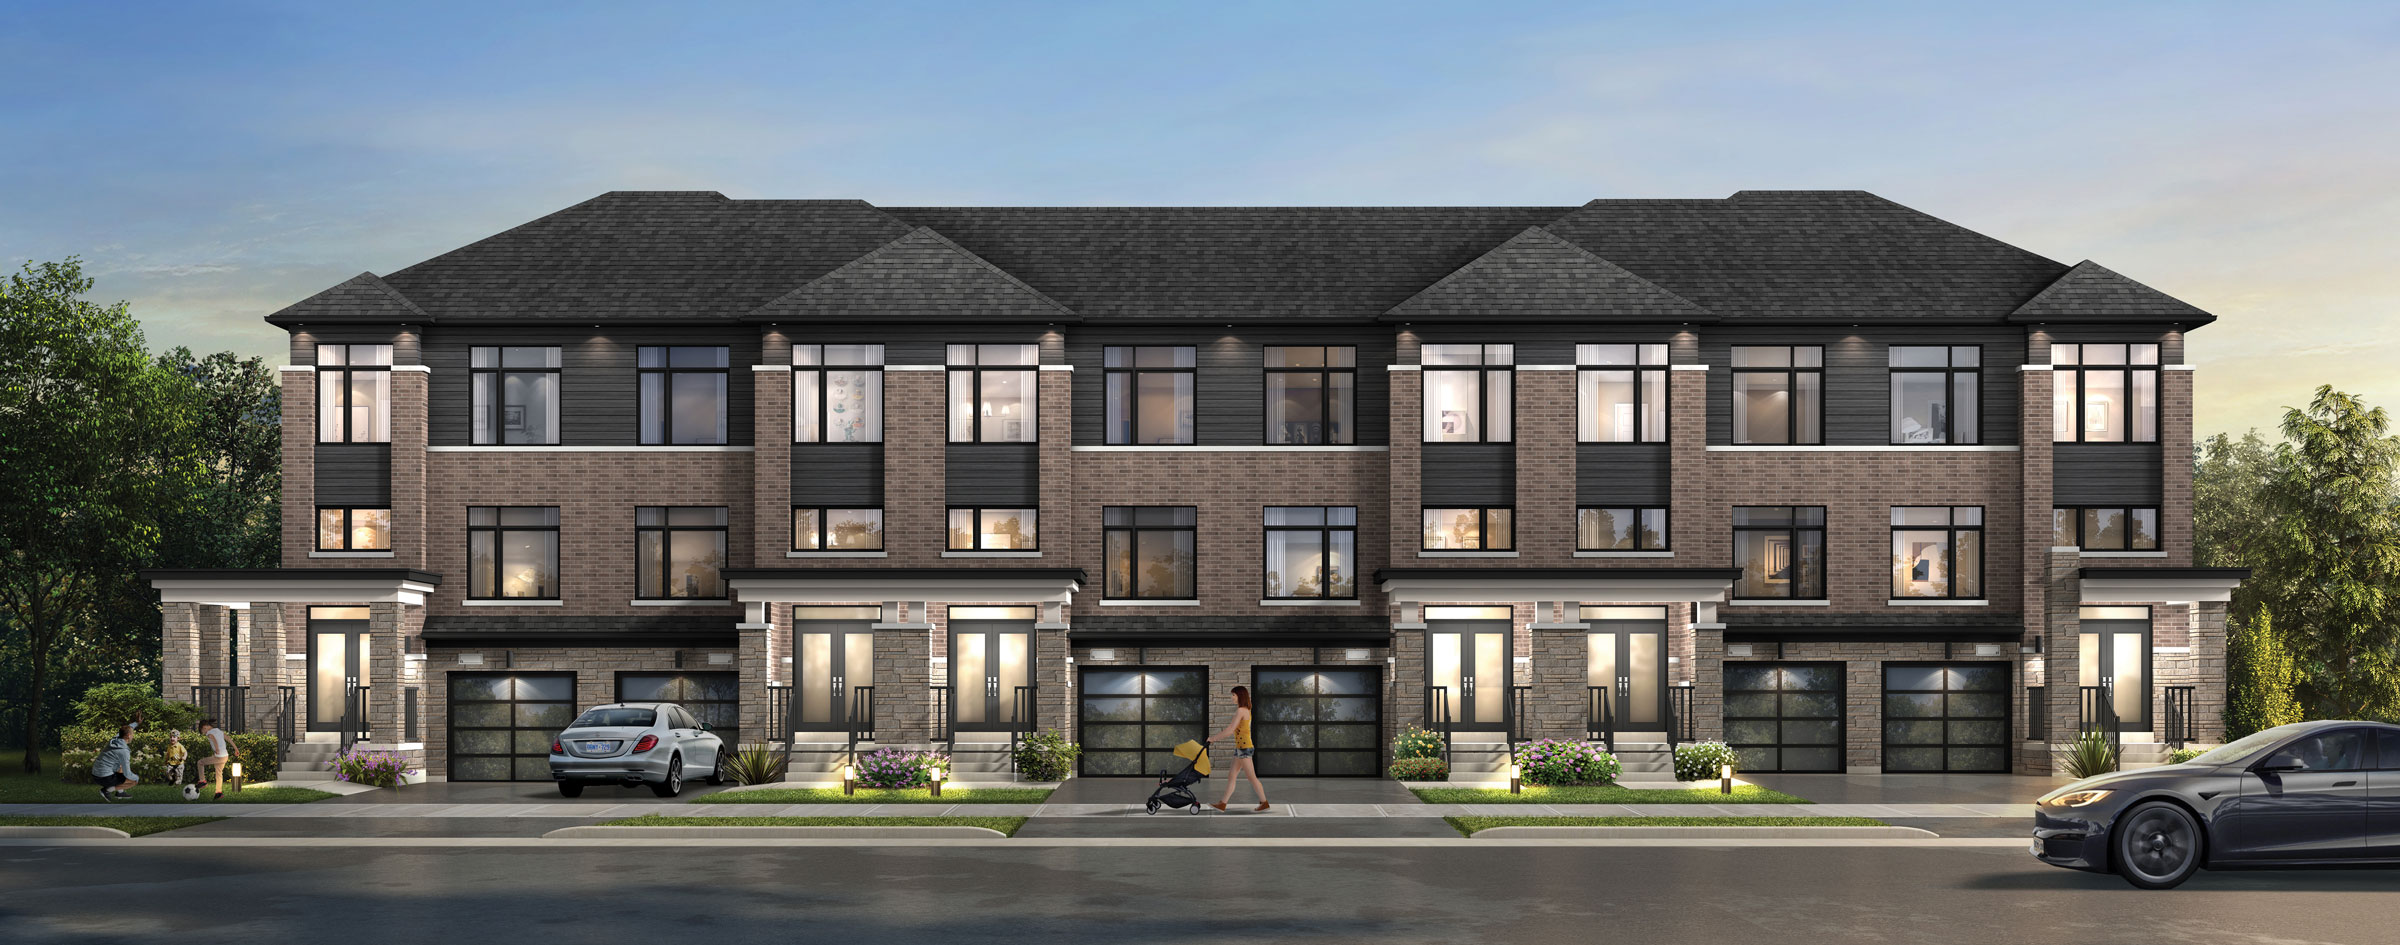 3 Story Townhomes